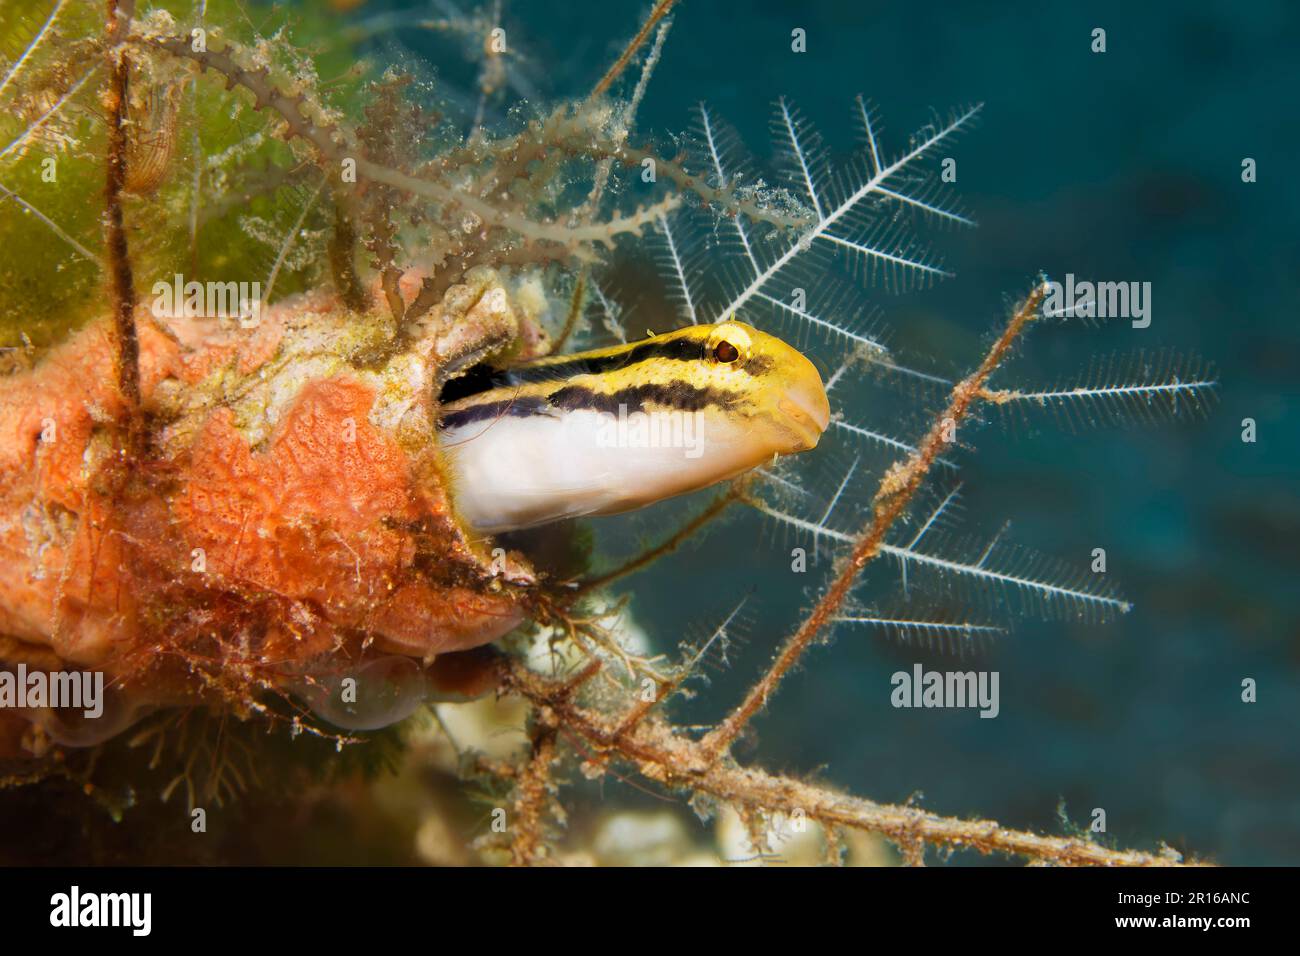 Striped mimicry blenny (Petroscirtes breviceps), in its home tube, Sulu Sea, Pacific Ocean, Apo Island Protected Landscape-Seascape, Negros, Visayas Stock Photo